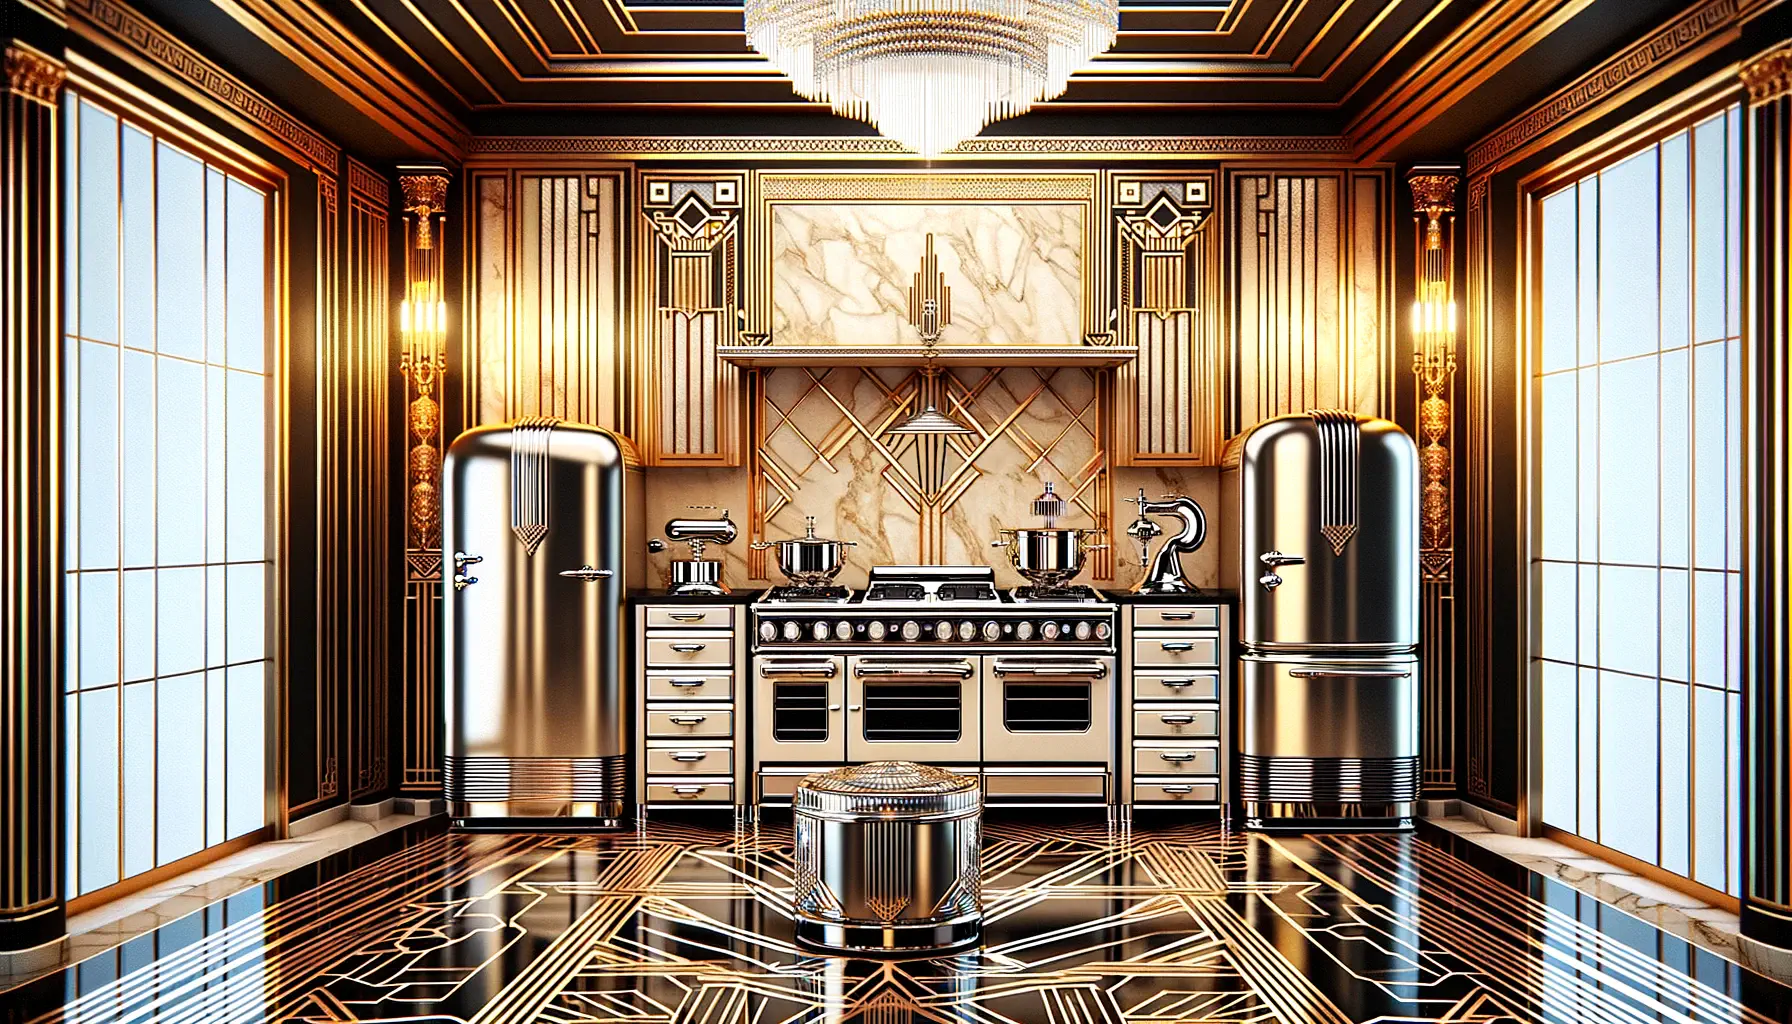 An art deco image of a kitchen.